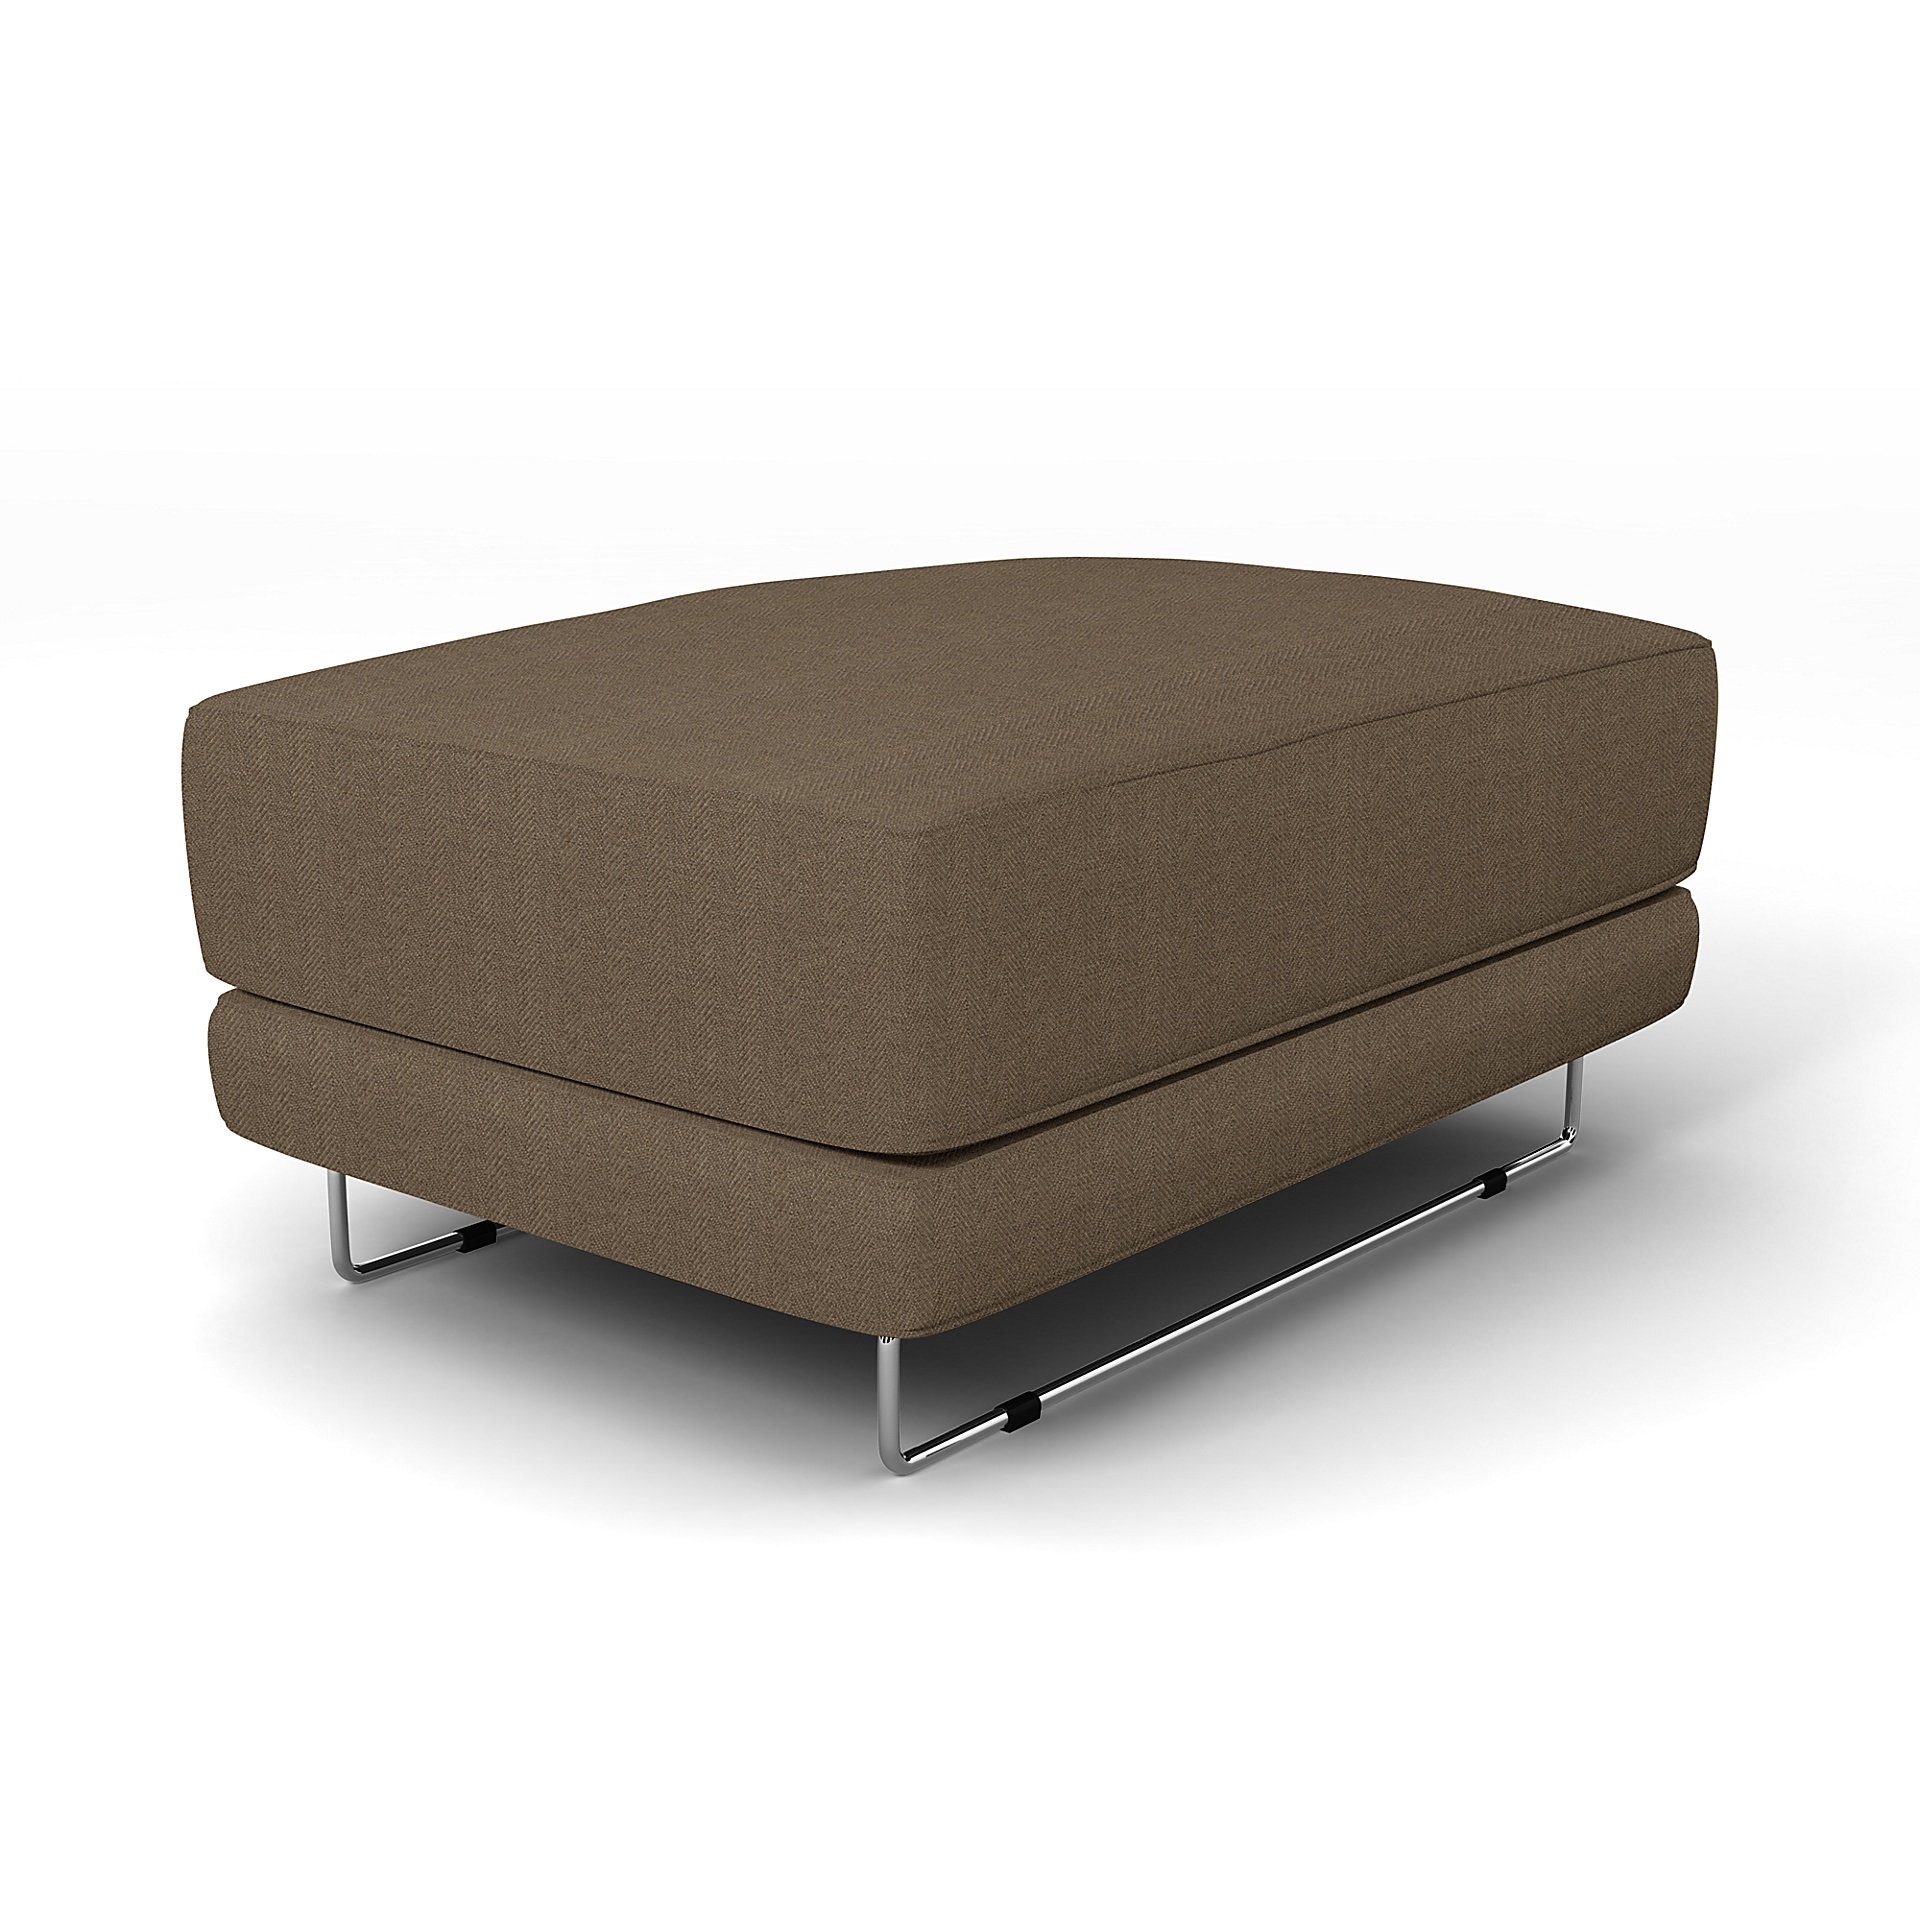 IKEA - Tylosand Footstool Cover, Dark Taupe, Boucle & Texture - Bemz